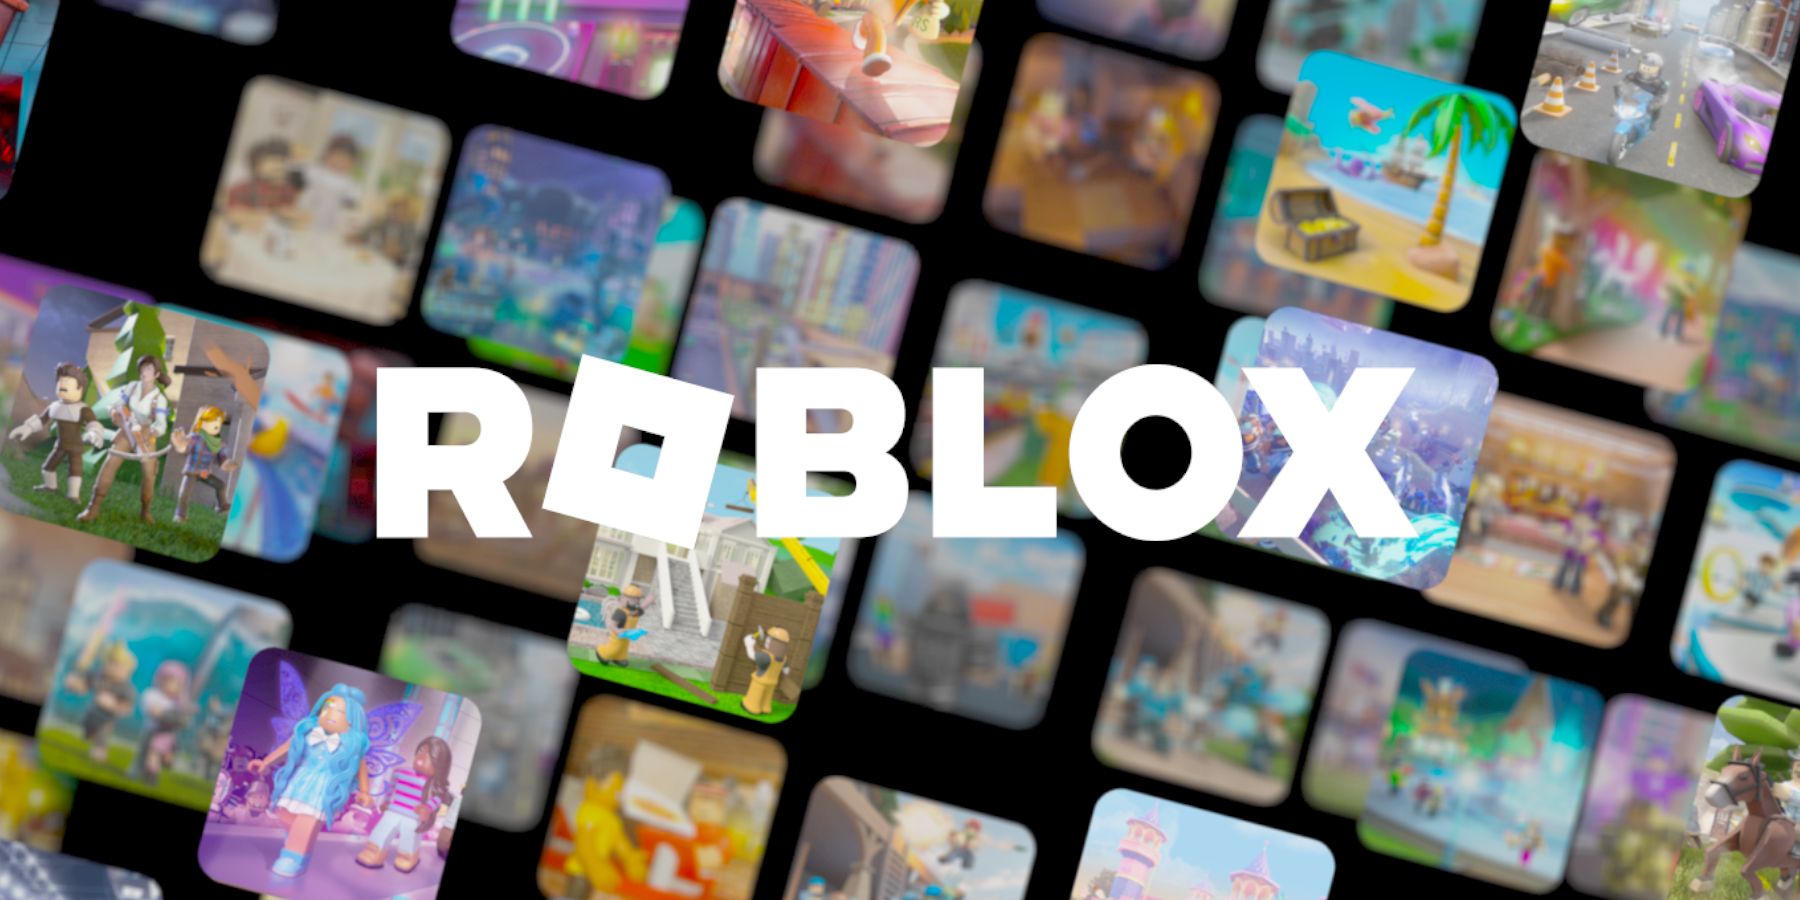 Roblox is starting to allow 17+ rated experiences with 'violence